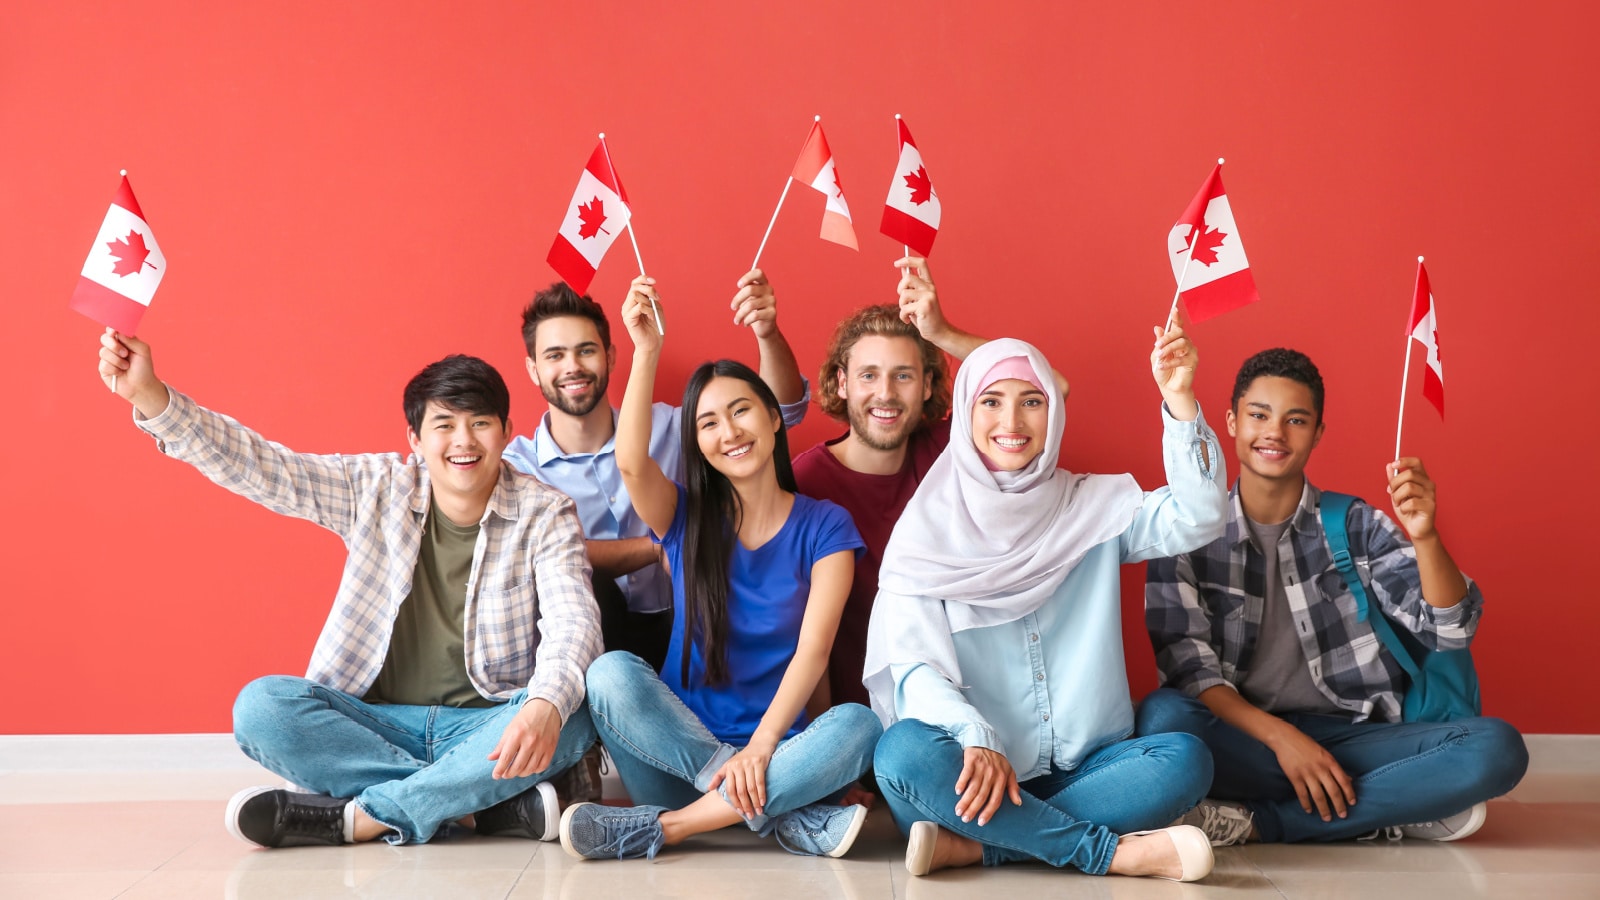 Group of students with Canadian flags sitting near color wall